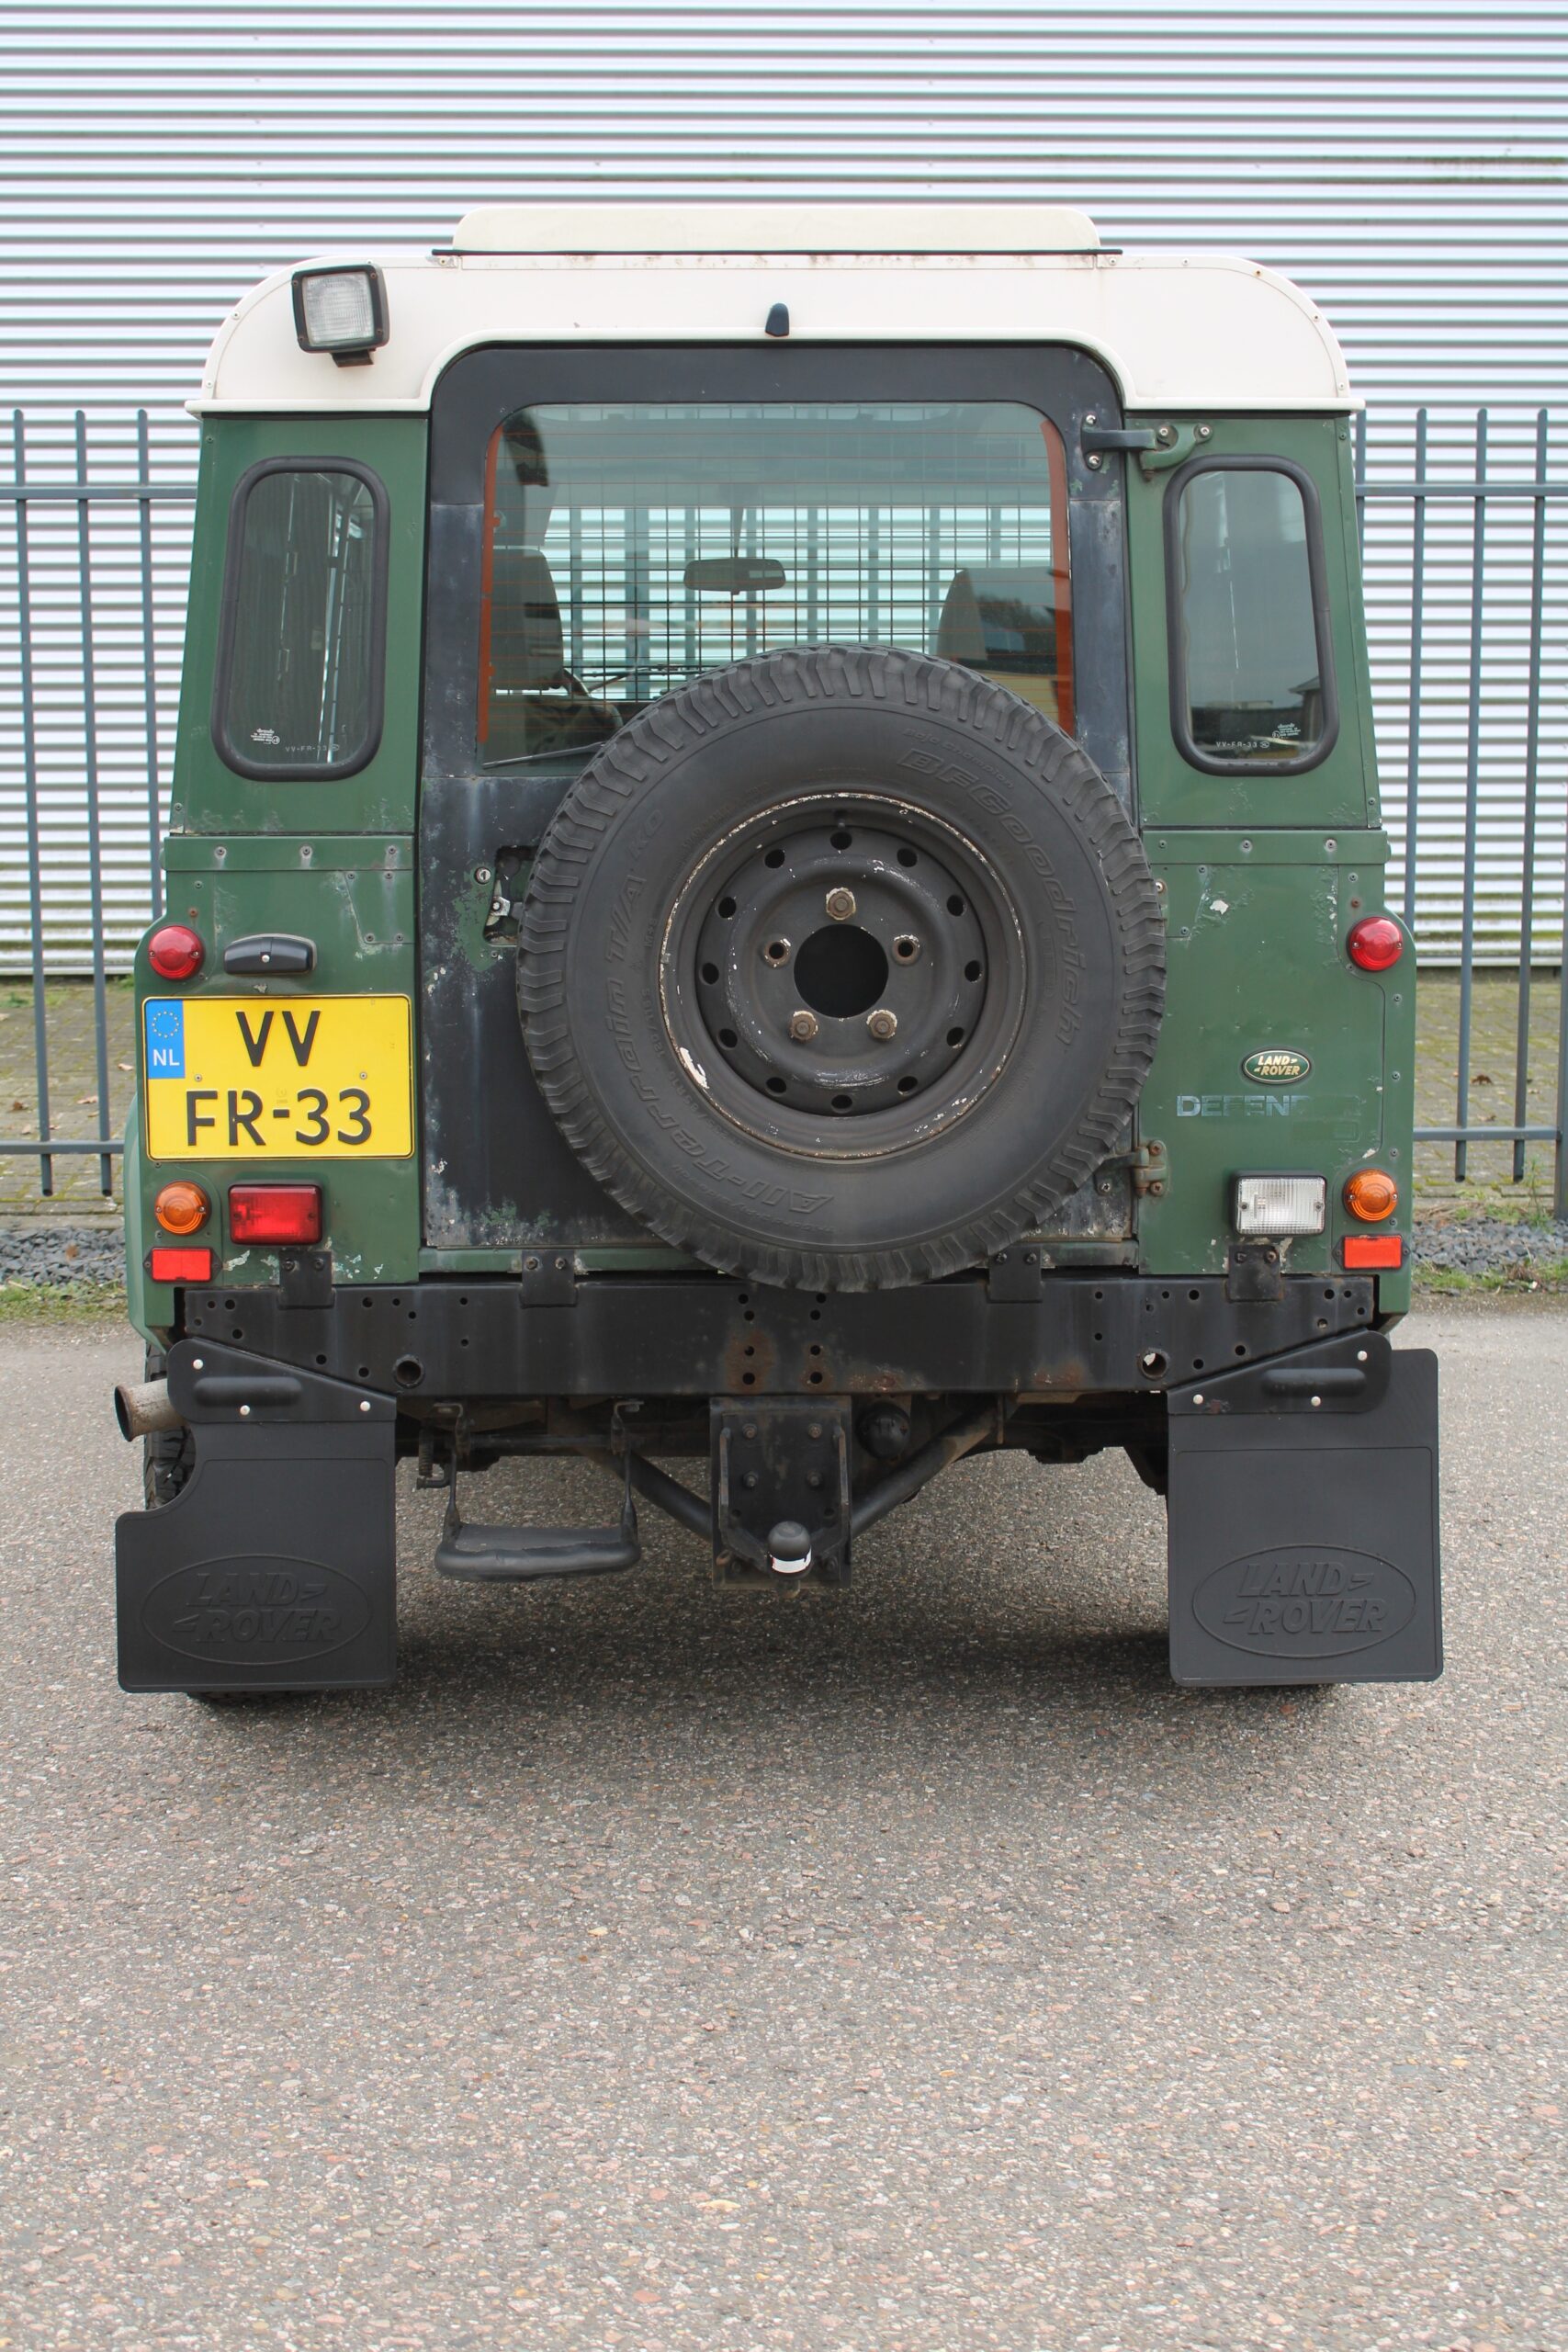 Land Rover Defender 90 Tdi County Hard Top/ Youngtimer